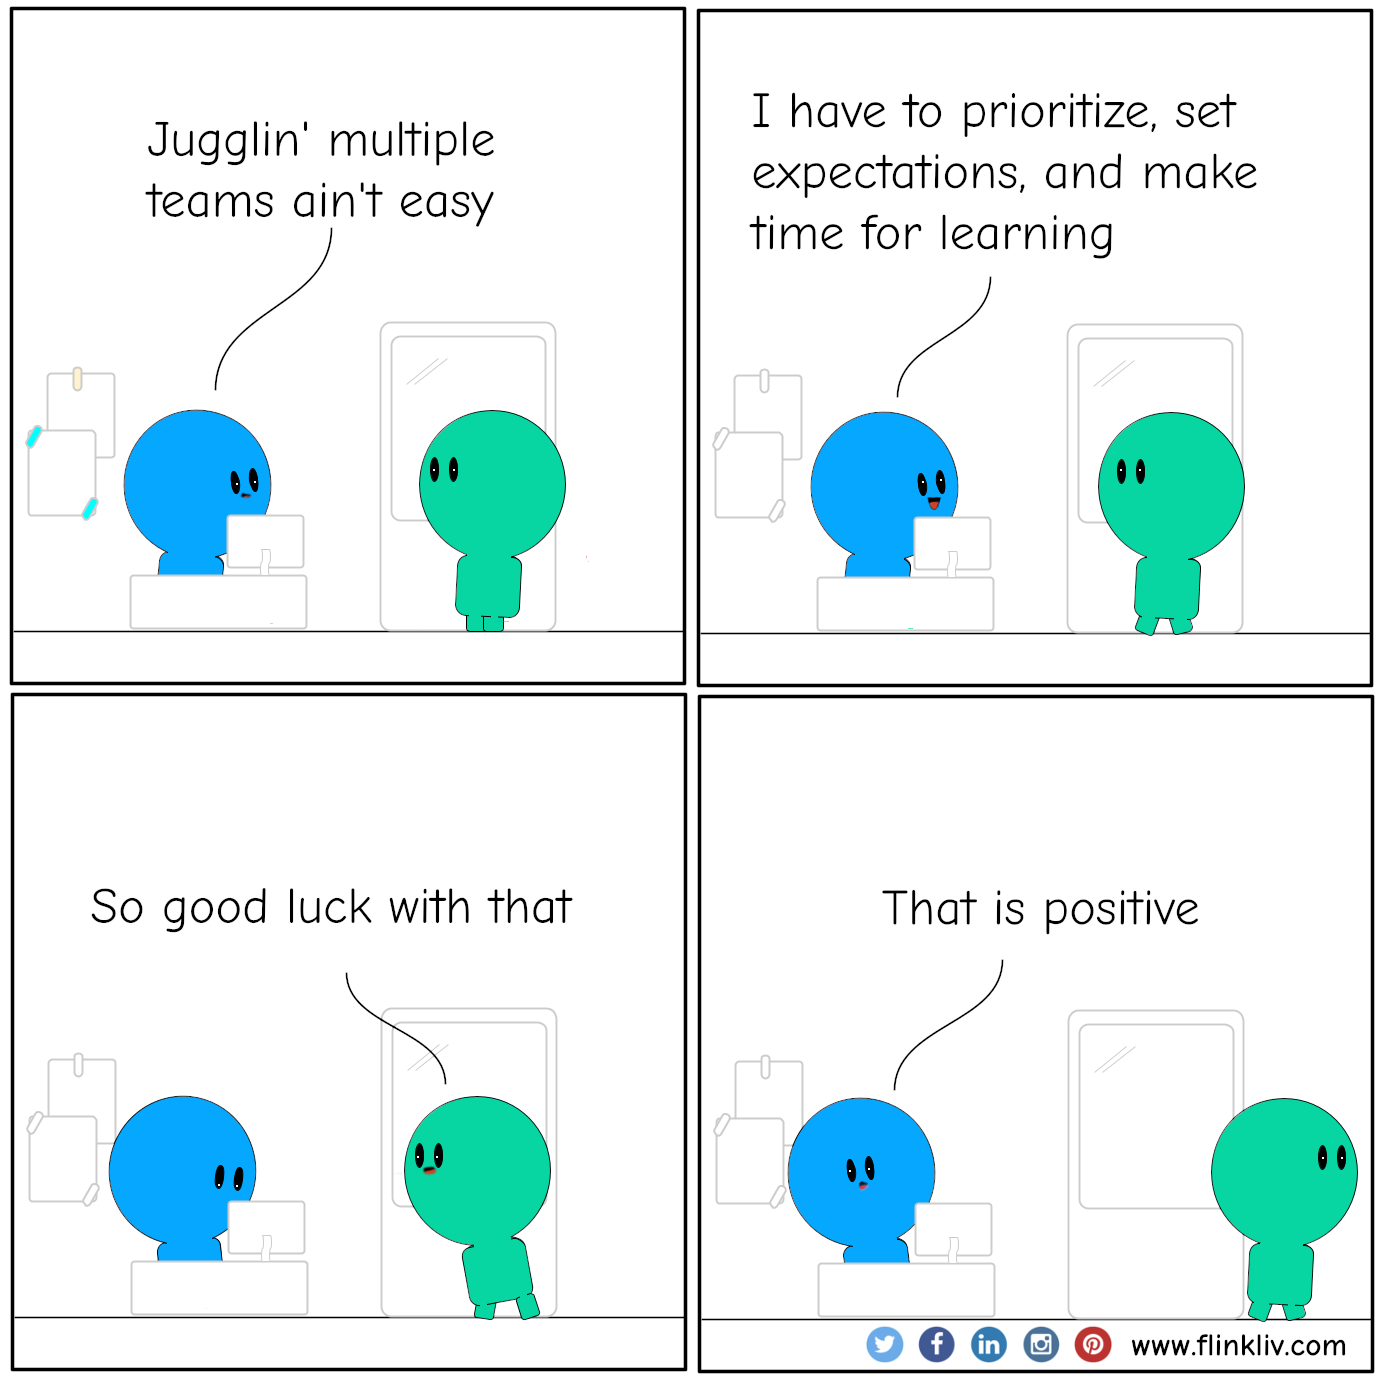 Conversation between A and B about how to manage multiple teams.
				B: Jugglin' multiple teams ain't easy. 
				B: I have to prioritize, set expectations, and make time for learning.
				A: So good luck with that.
				B: That is positive

			